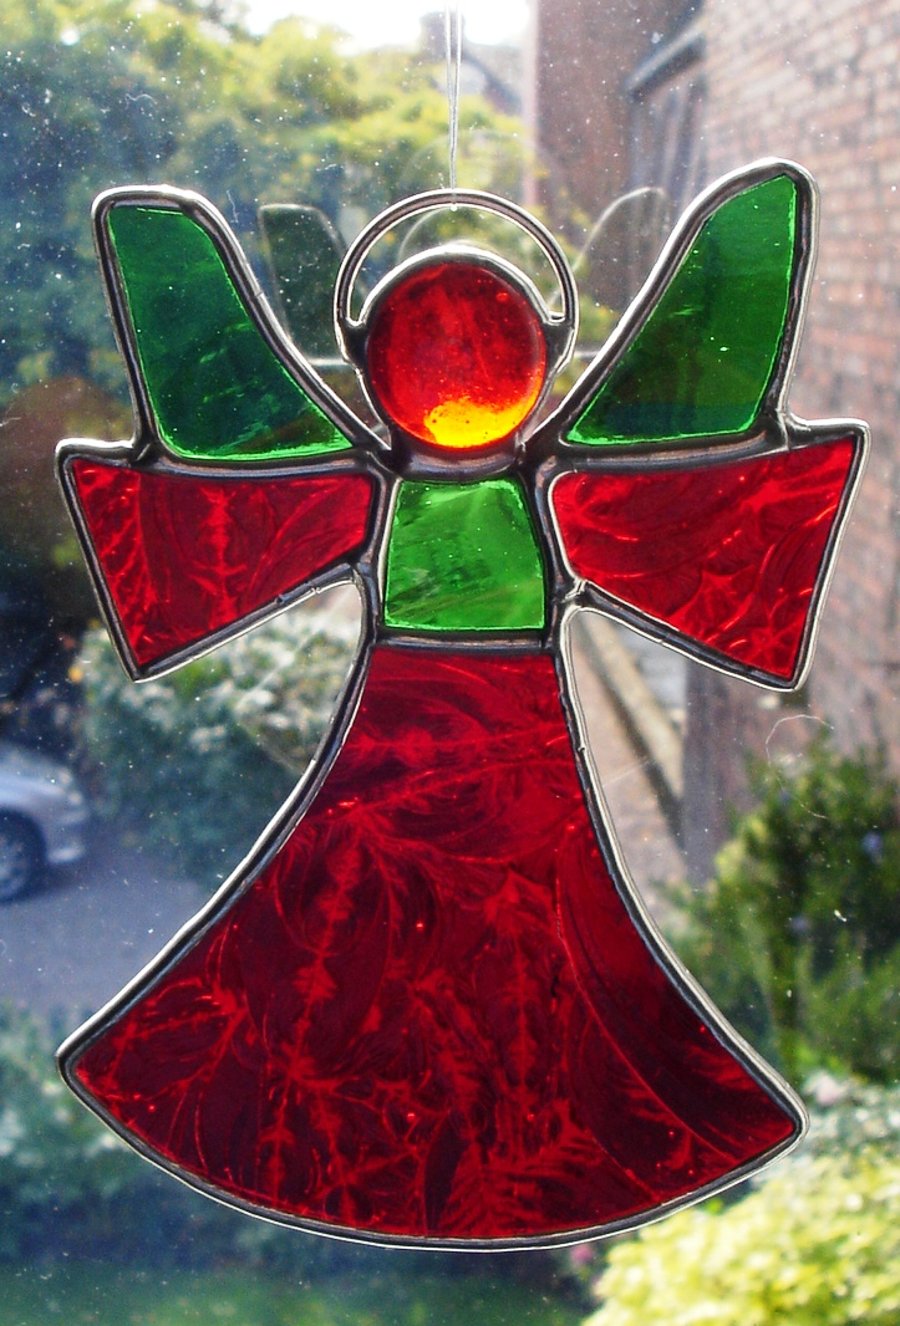 STAINED GLASS ANGEL